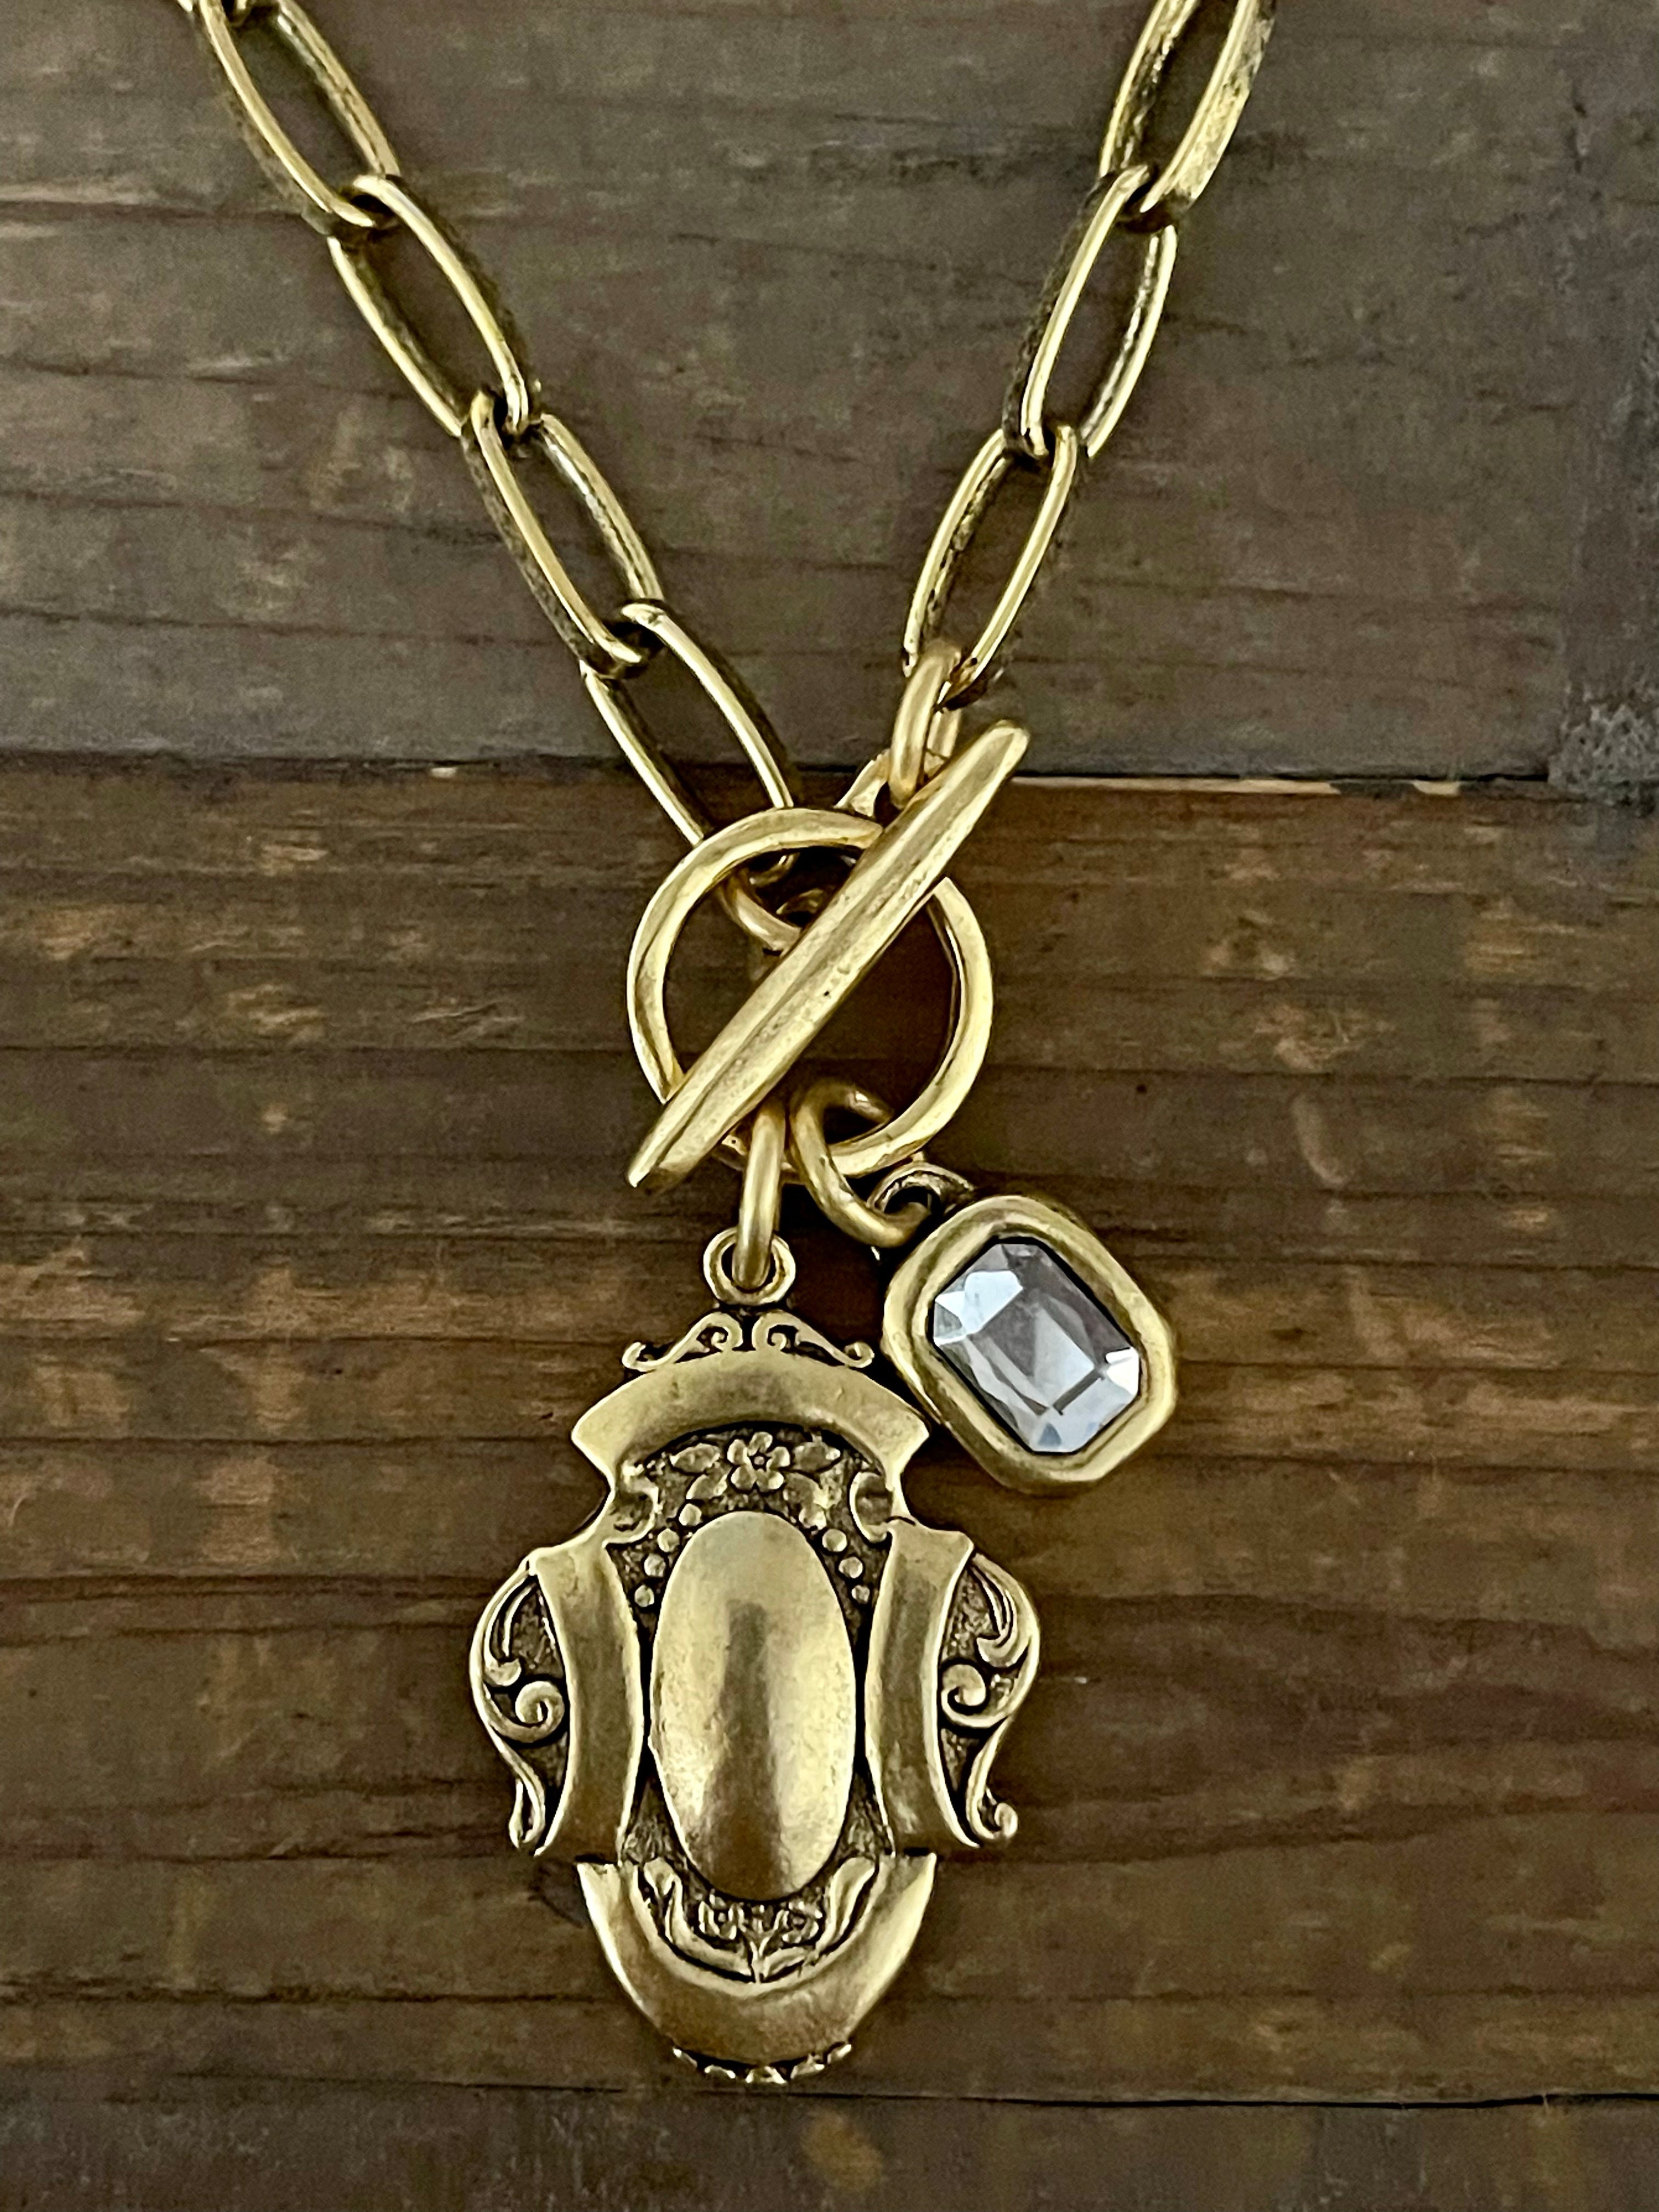 Gold Plated 18" Chain with Reproduction Watch Fob Pendant and Swarovski Crystal